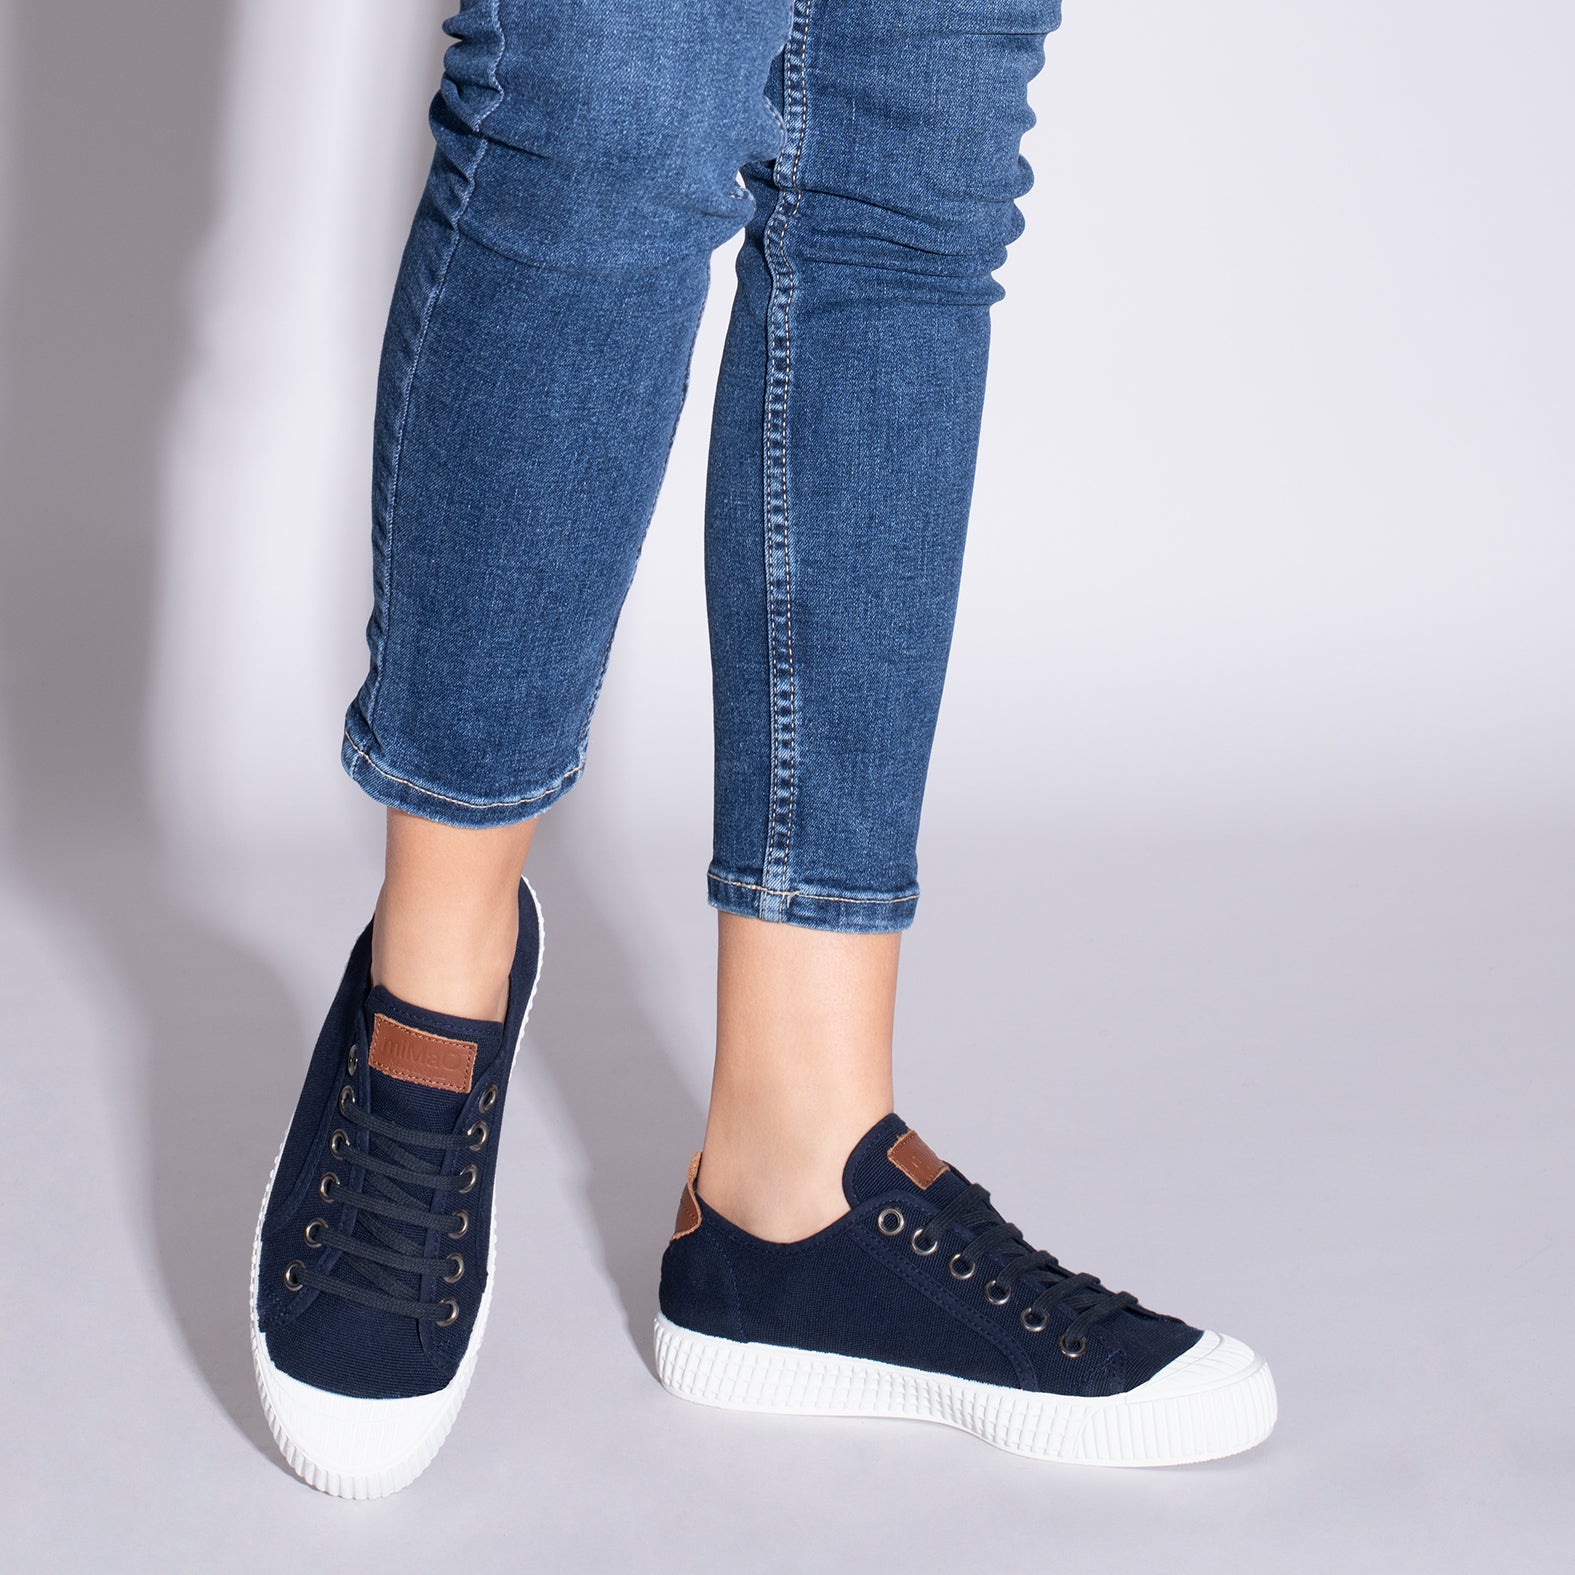 BAMBA – NAVY water-repellent canvas sneakers